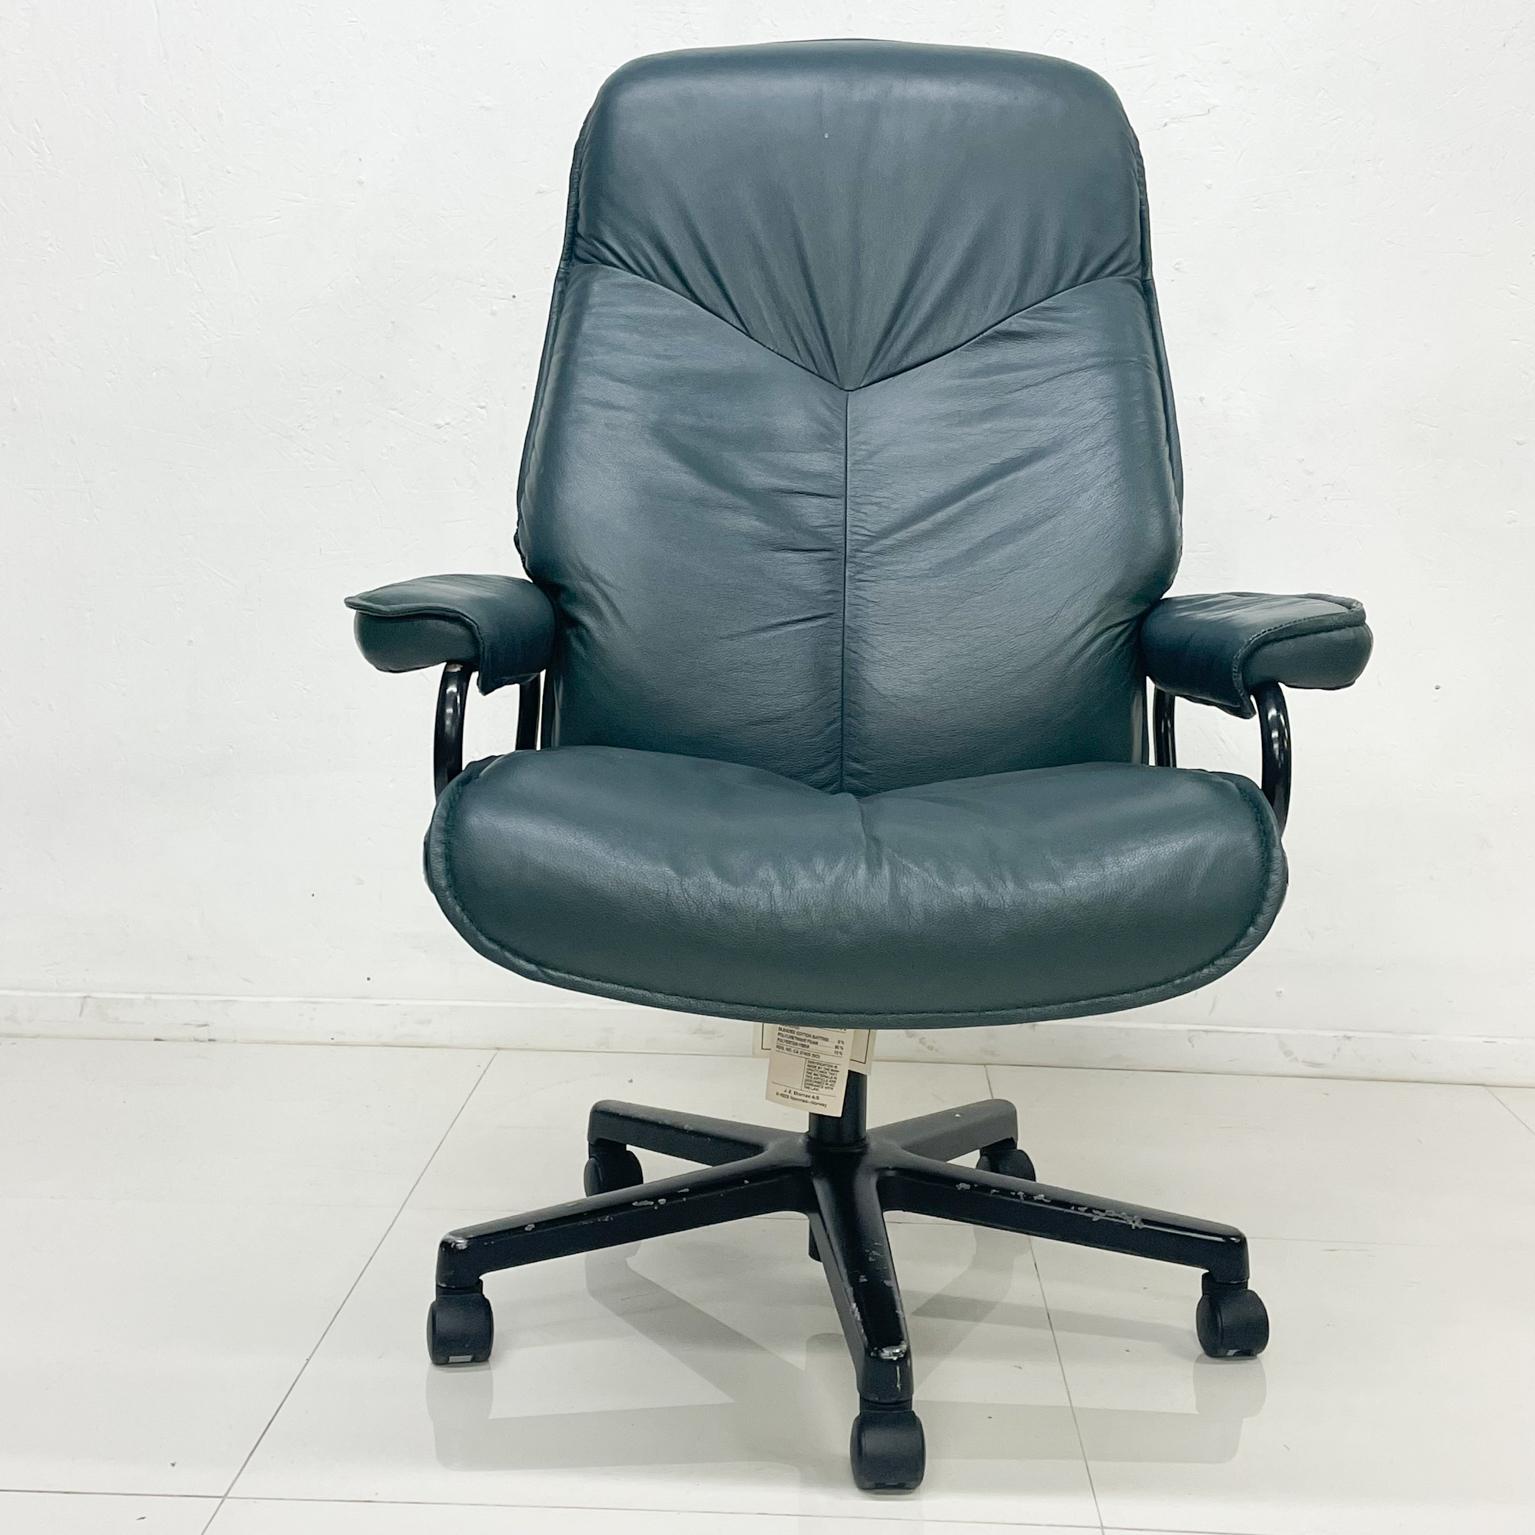 Office chair
Vintage EKORNES Green Leather Rolling Office Desk Chair NORWAY 1980s
Height is adjustable. Back can be tilted.
45 h x 30 d x 29.5 w inches
Seat 19 adjustable Arm rest 48.5 Tallest Seat at 23.5 Arm rest 28.5 H
Original Preowned